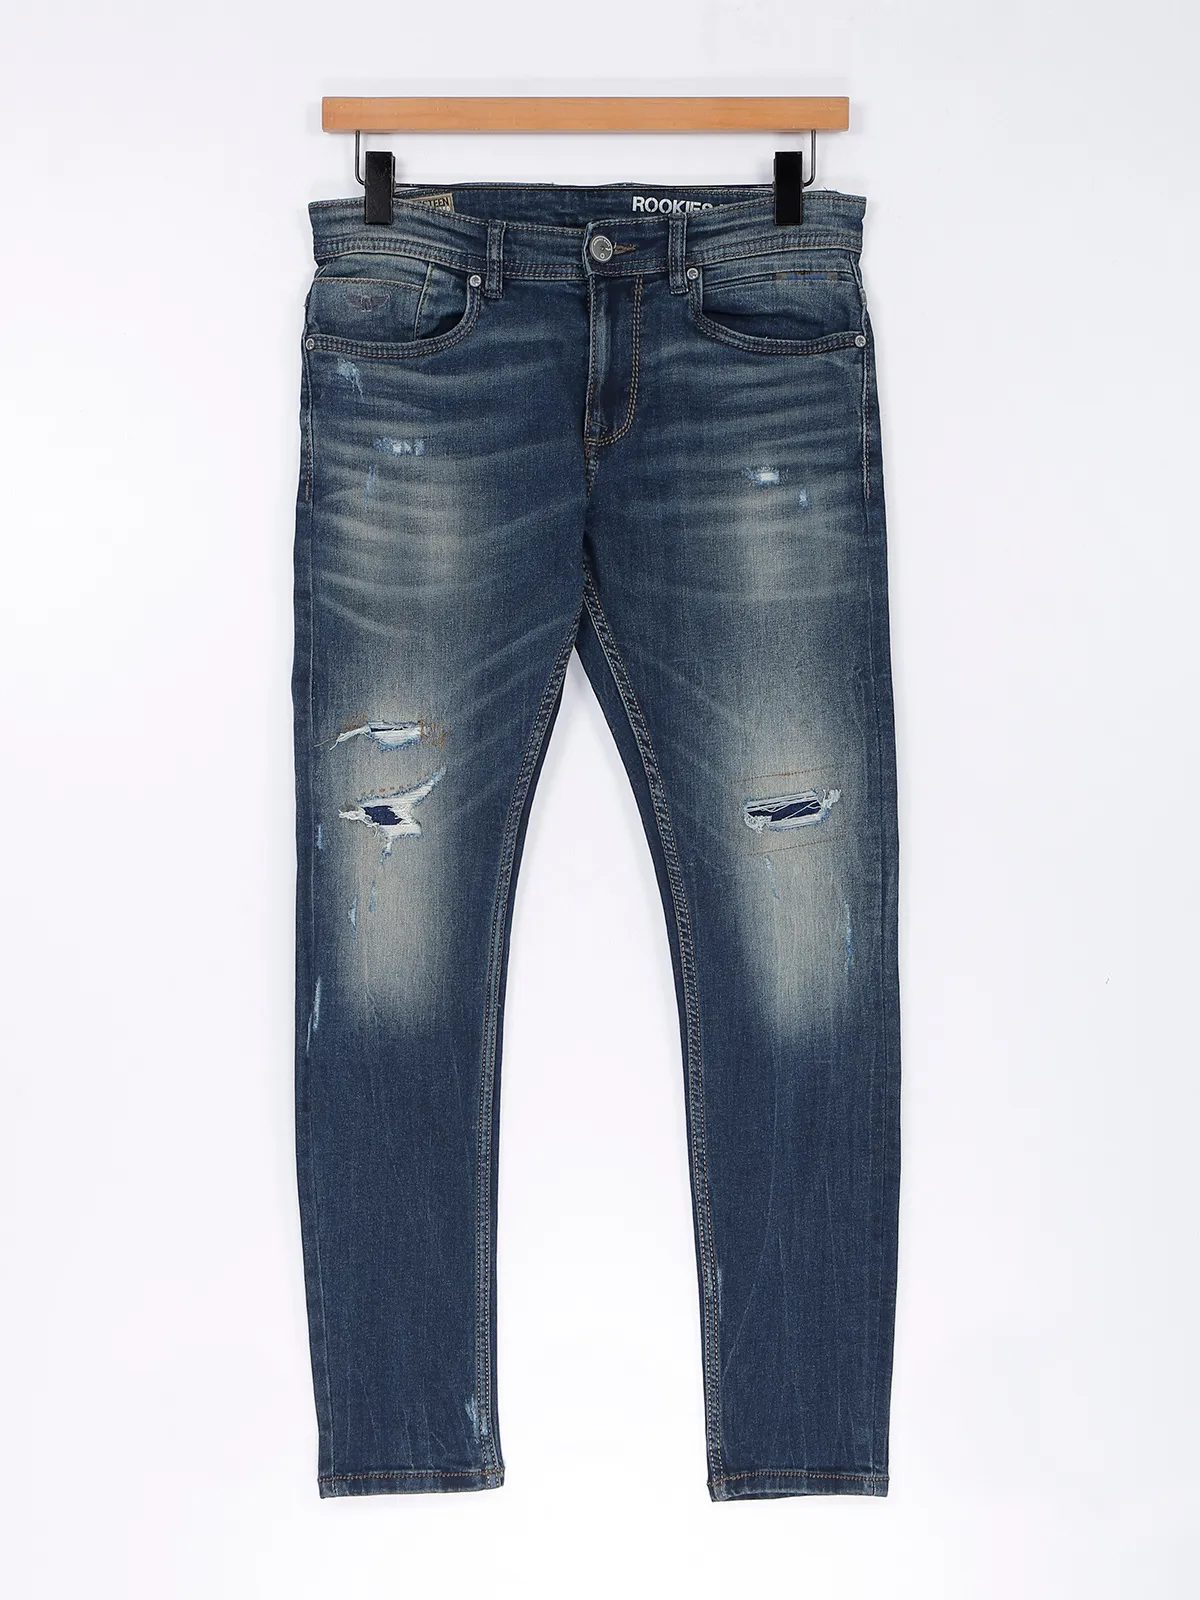 Rookies dark blue jeans in washed and ripped